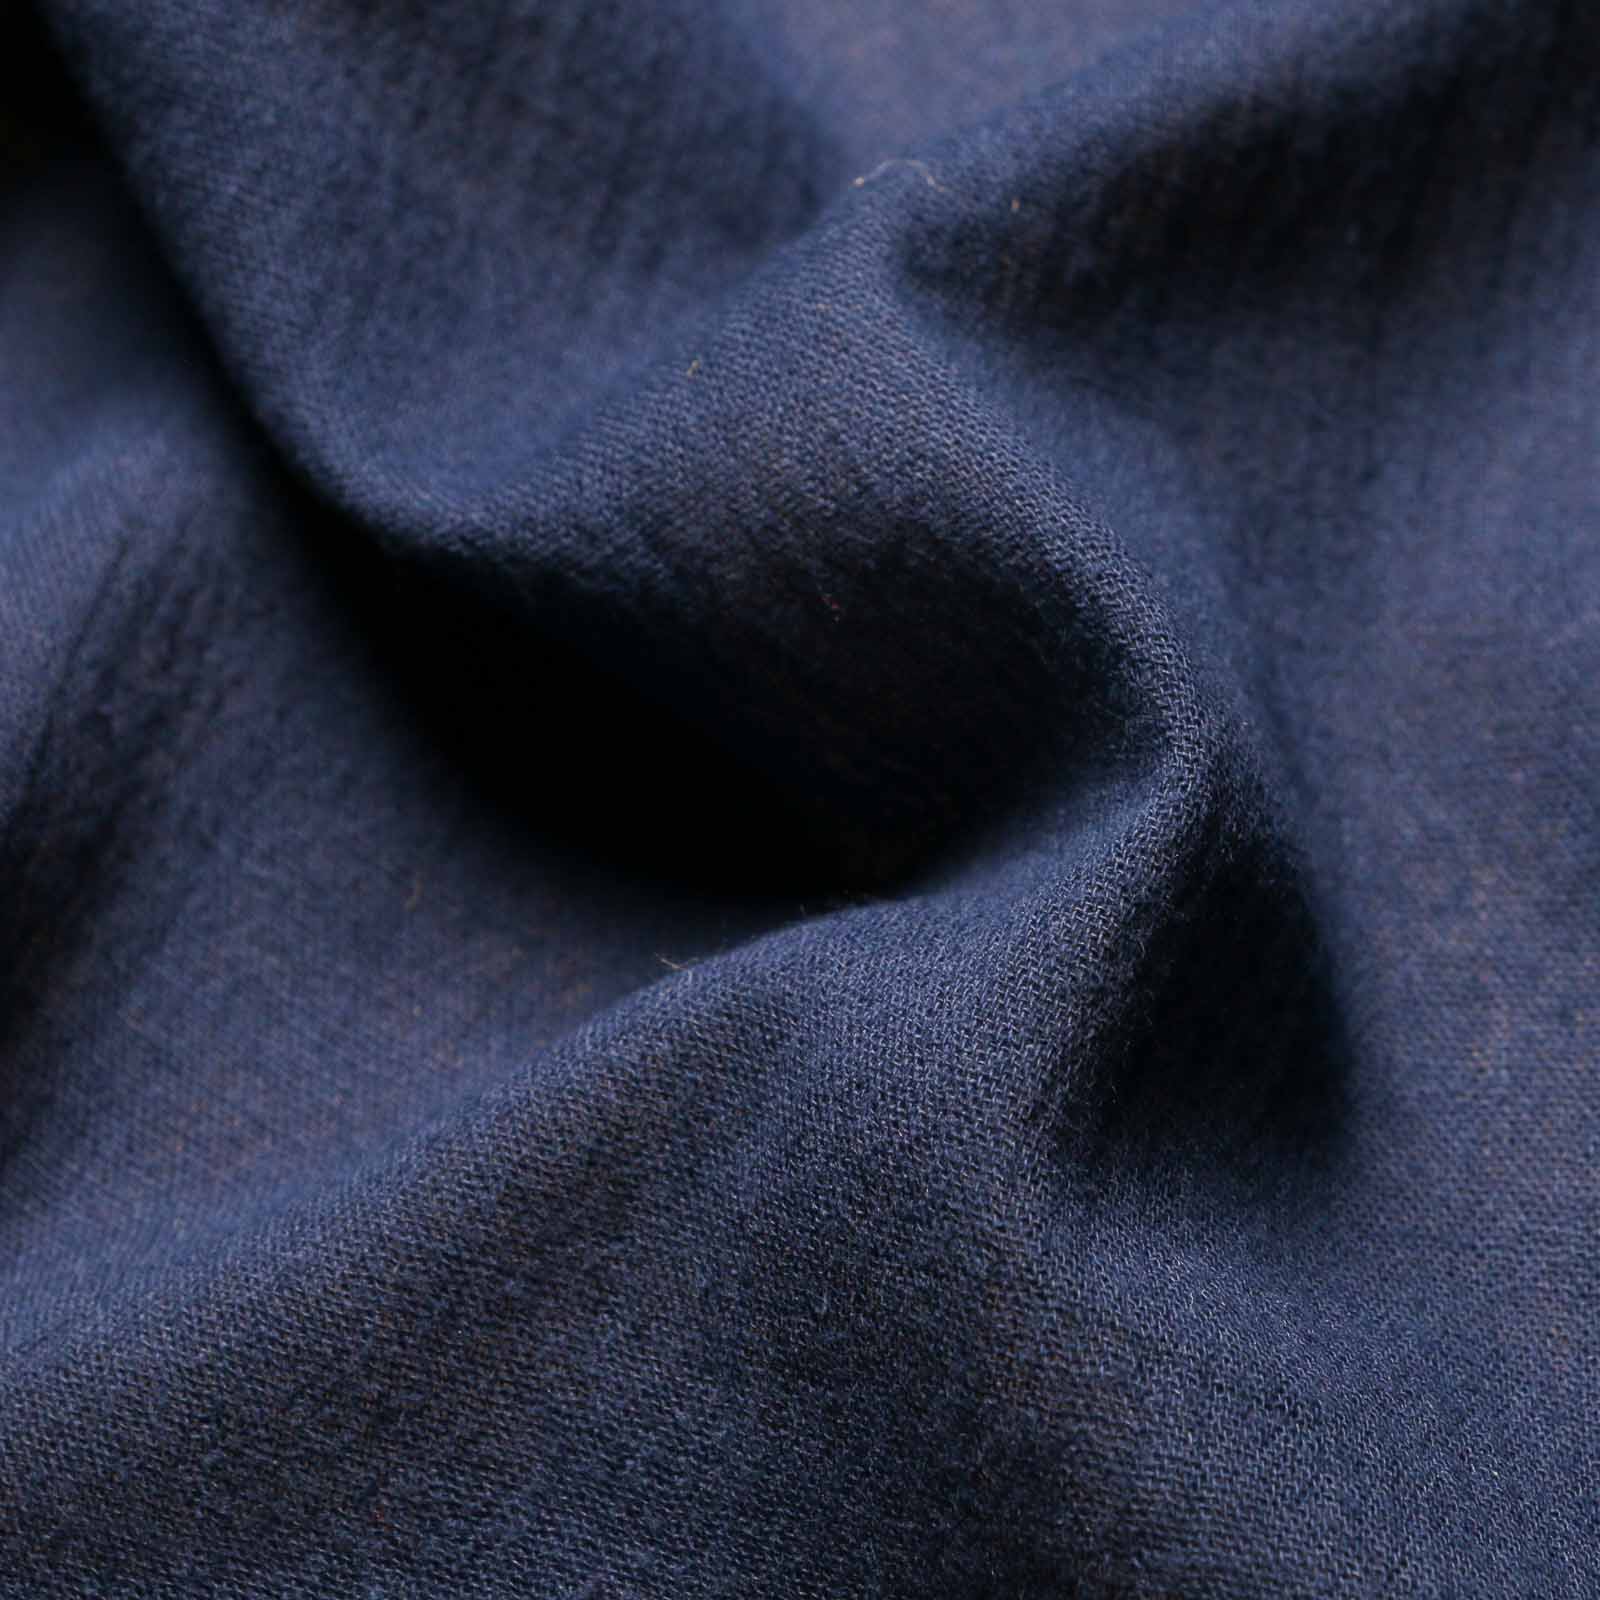 plain navy blue cotton dressmaking fabric voile with crinkle texture